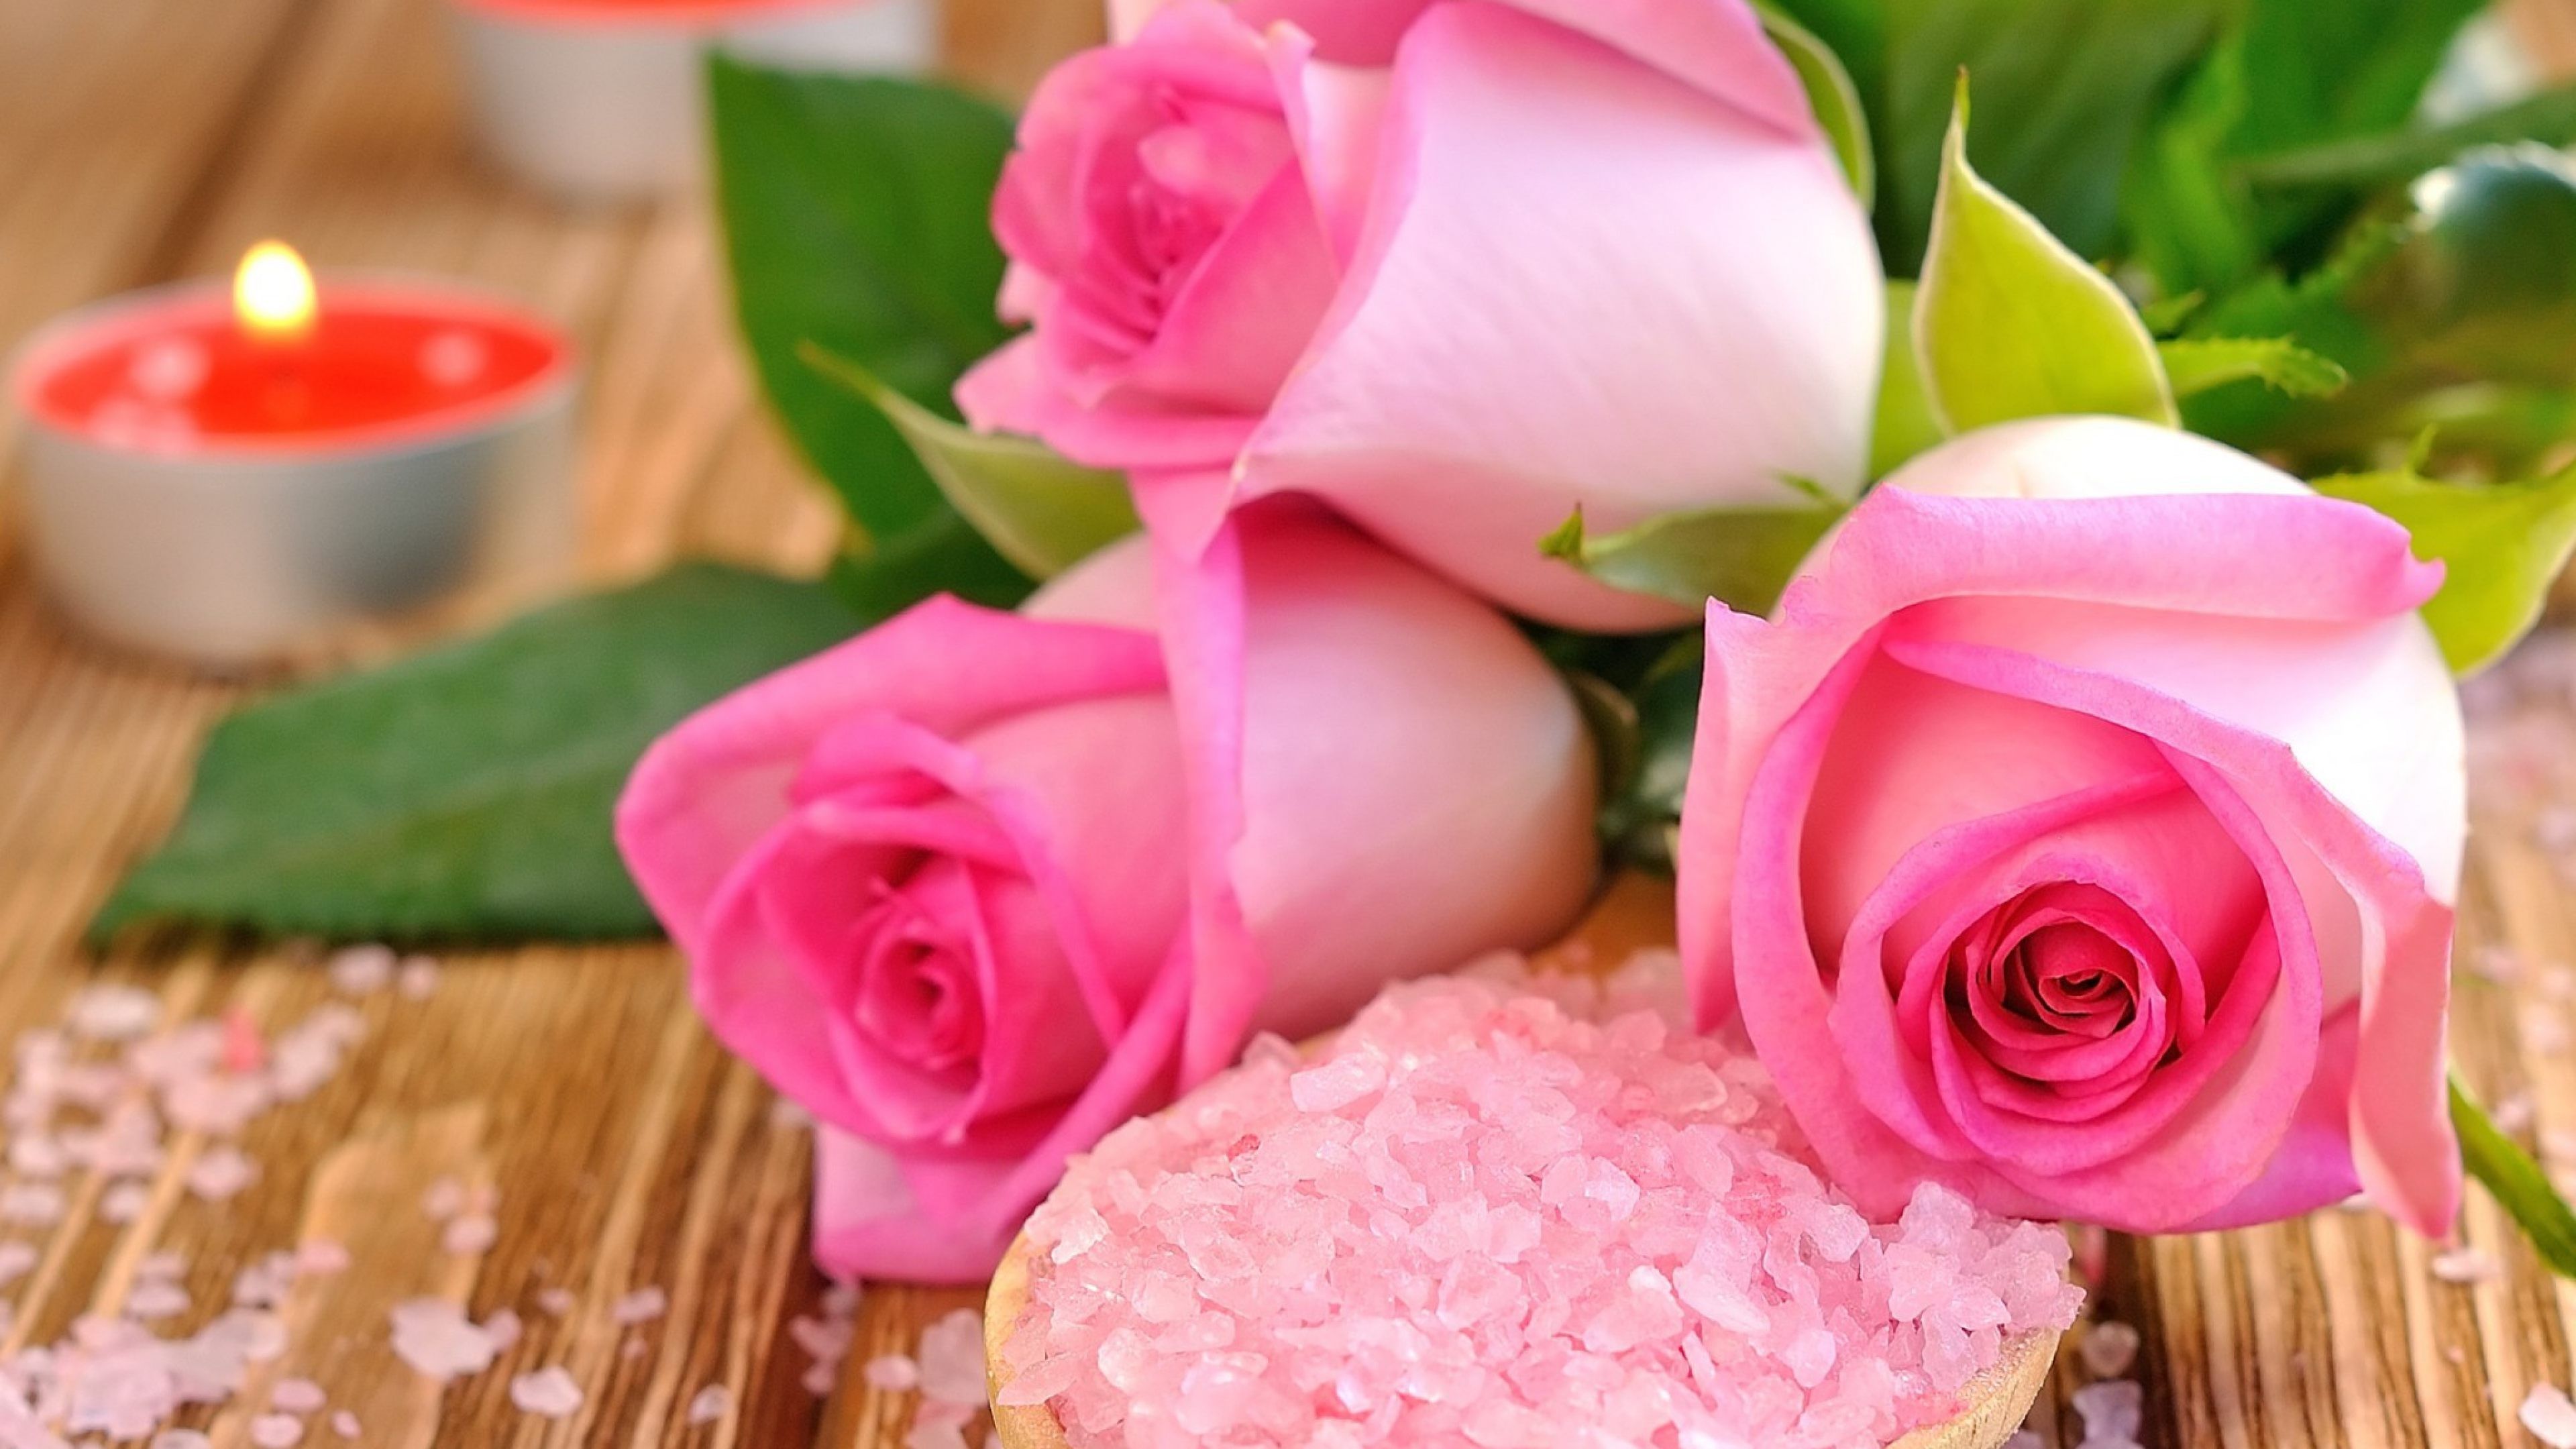 pink roses and candle 4k ultra HD wallpaper High quality walls